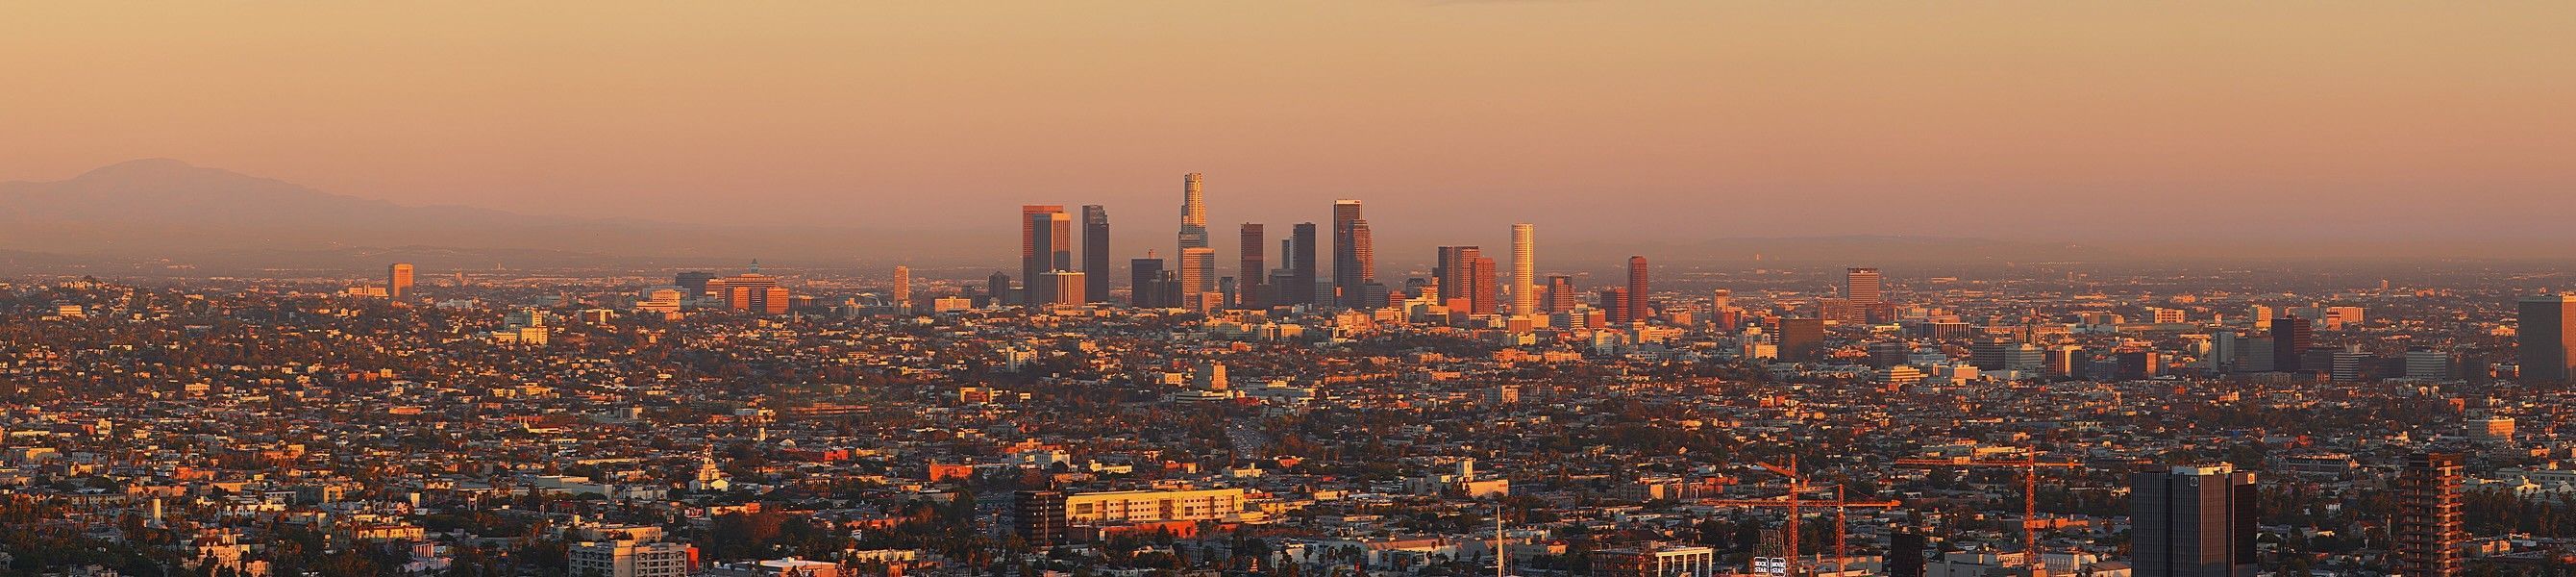 Los Angeles Wallpapers HD Download